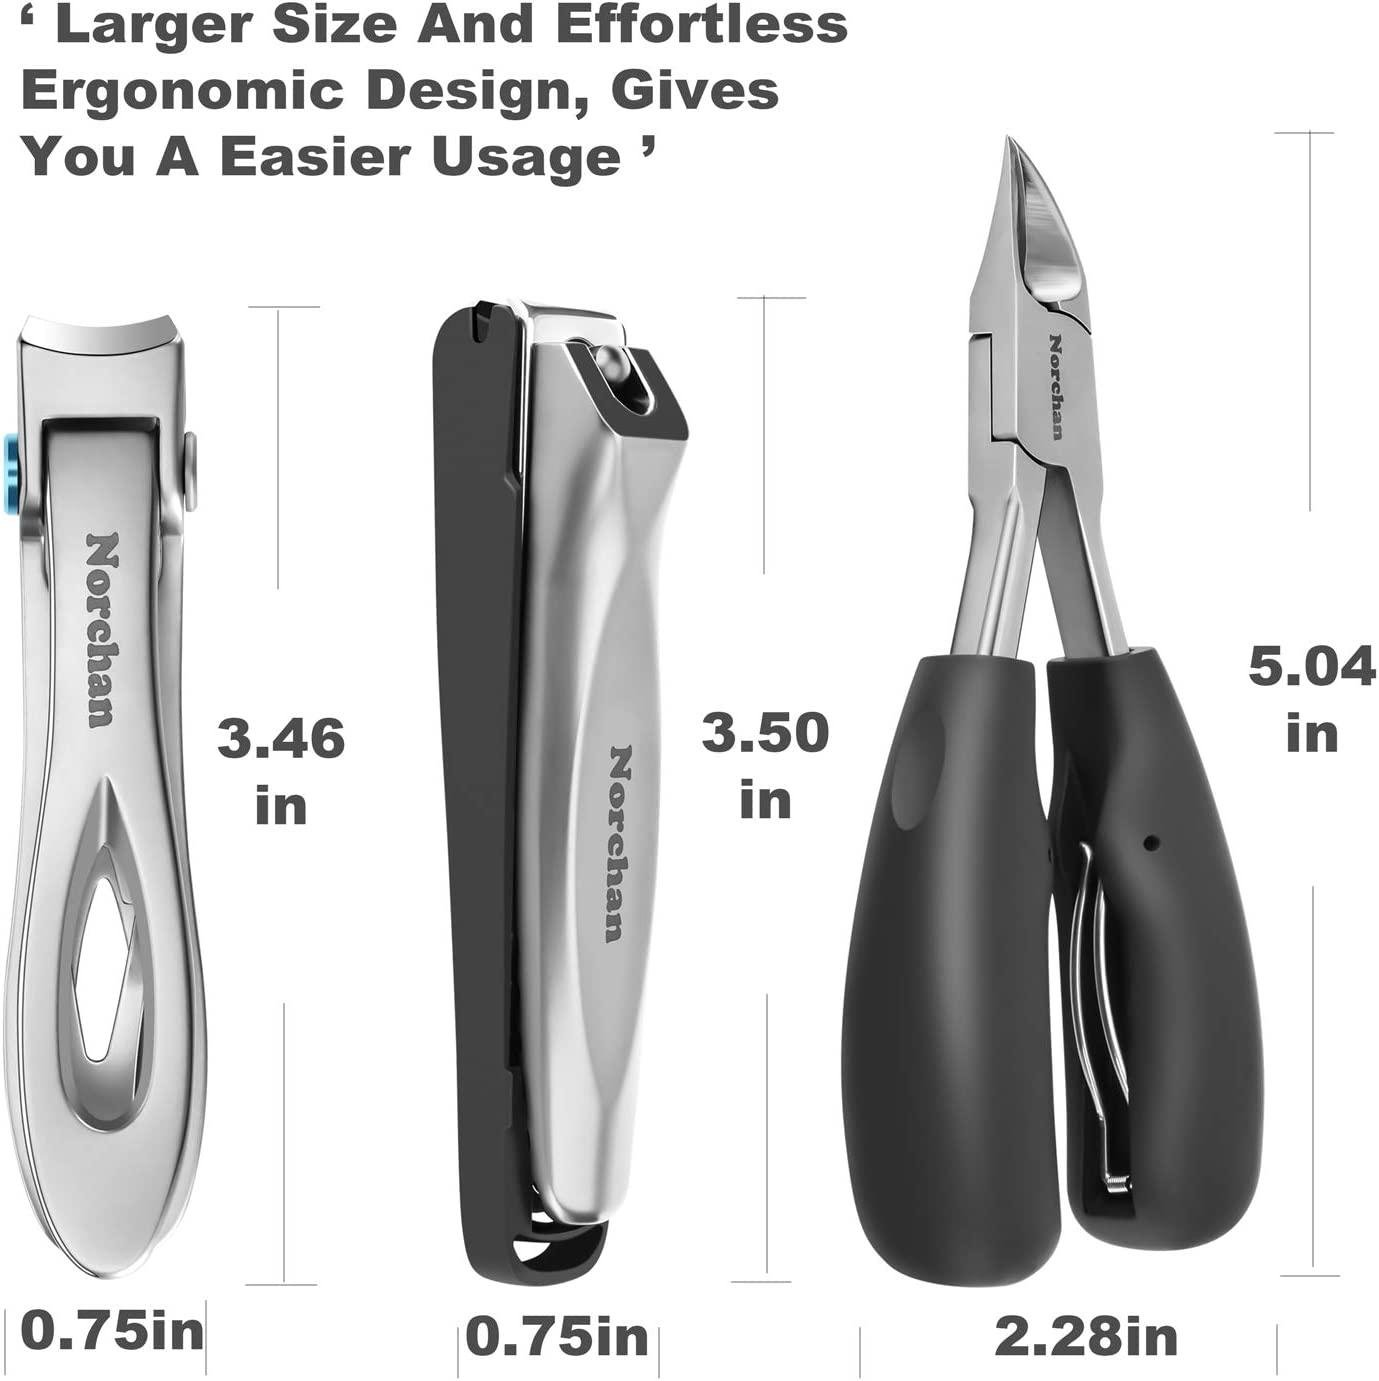 Norchan Large Nail Clippers Set, 5 Pcs Sharp Toenail and Fingernail Clippers  for Men and Women ( Premium, Big Size, Heavy-Duty Design )